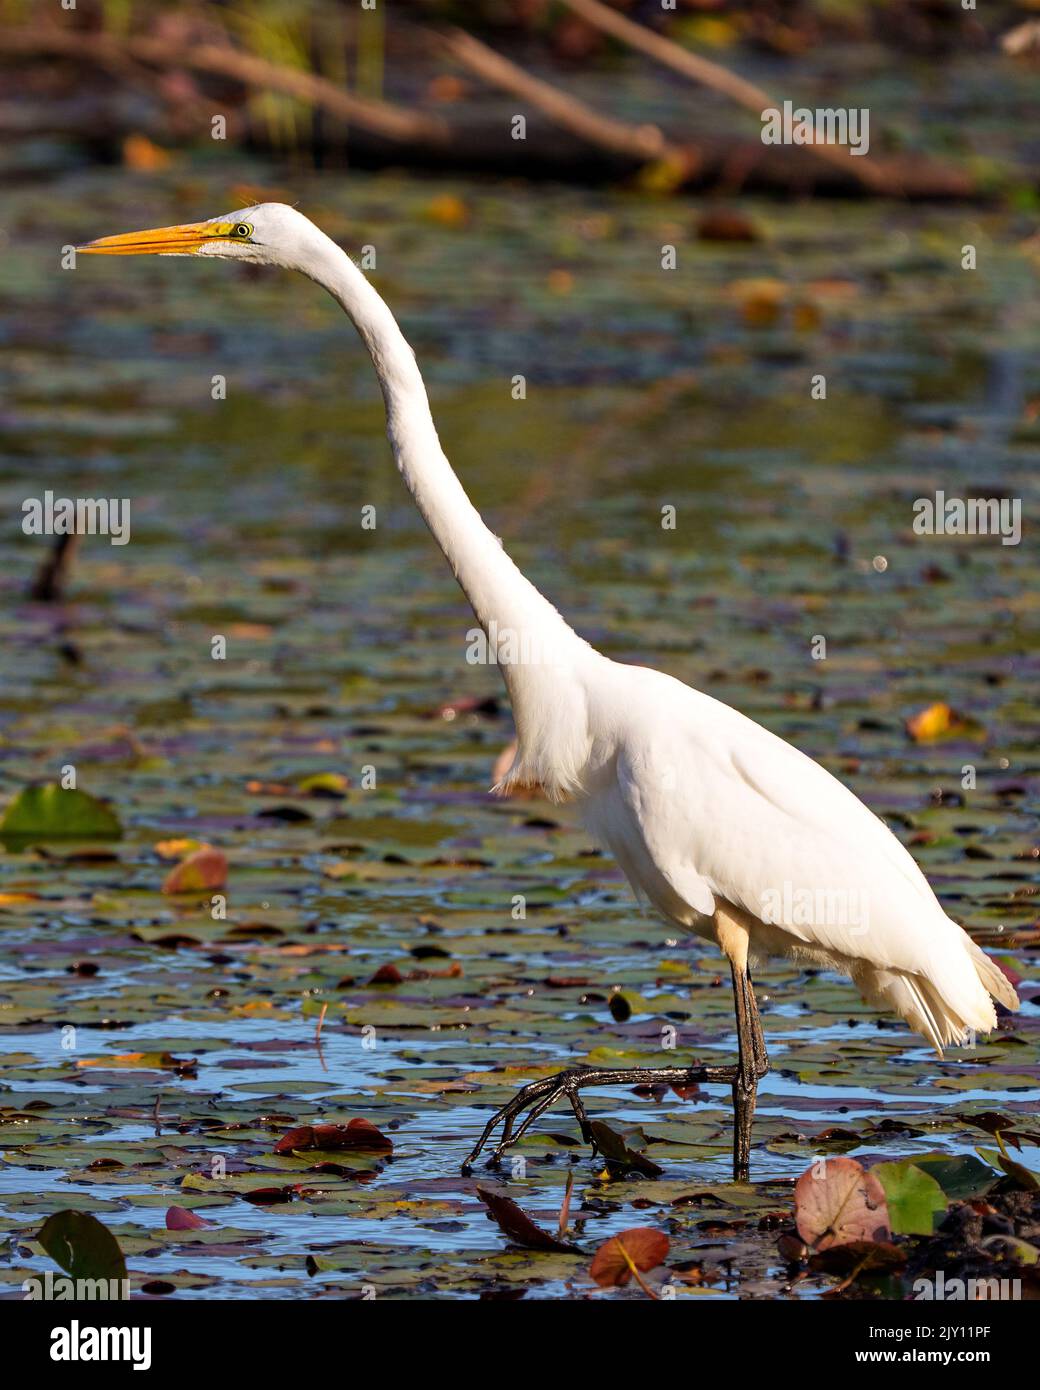 Great White Egret close-up profile side view in shallow water with foliage and water lily pads background in its environment and wetland habitat. Stock Photo